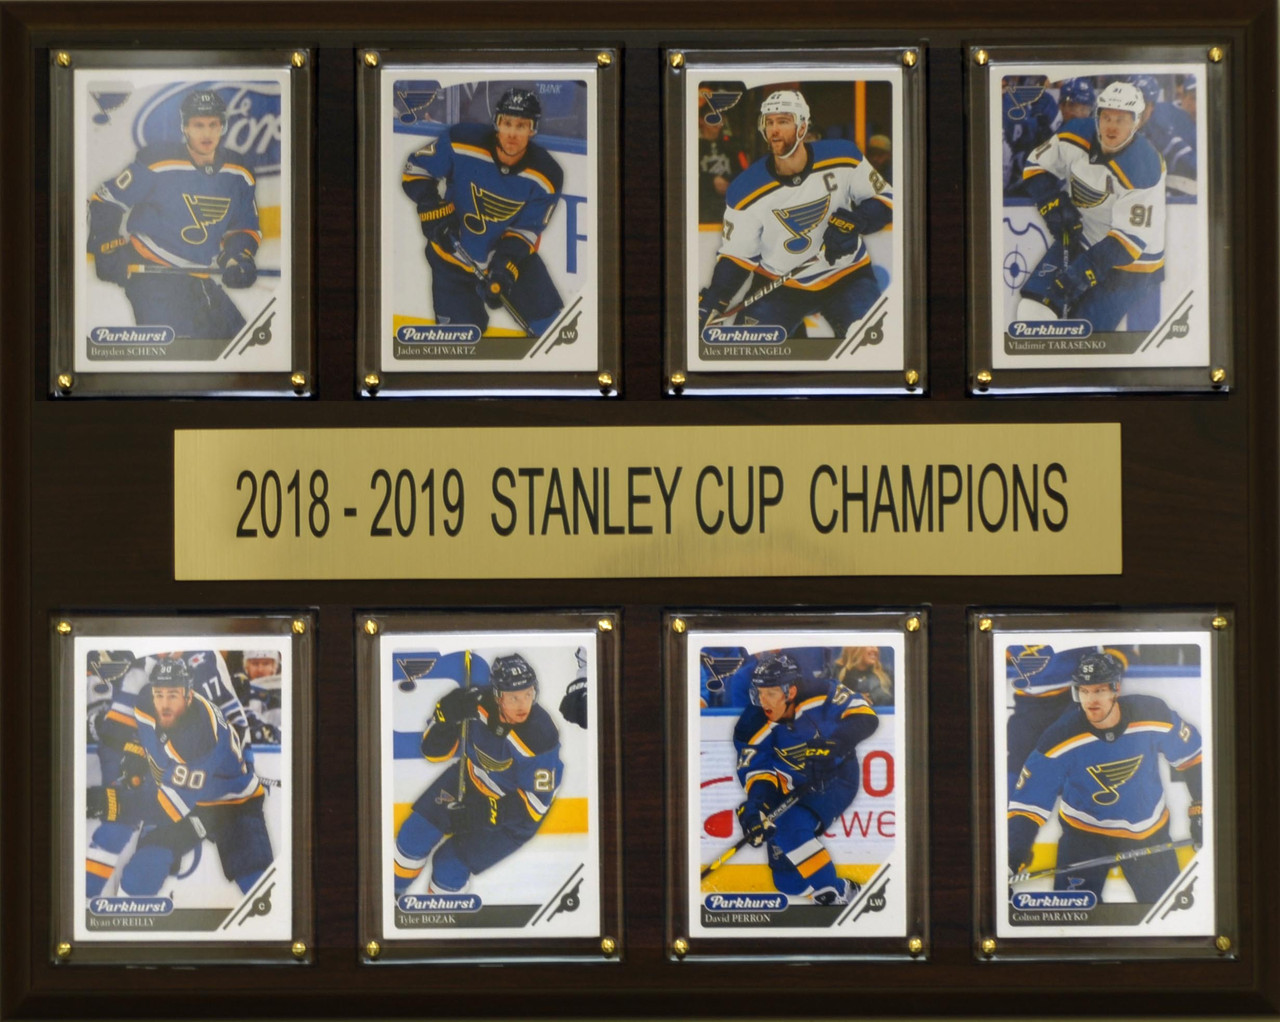 Vladimir Tarasenko St. Louis Blues 2019 Stanley Cup Champions 12'' x 15''  Sublimated Plaque with Game